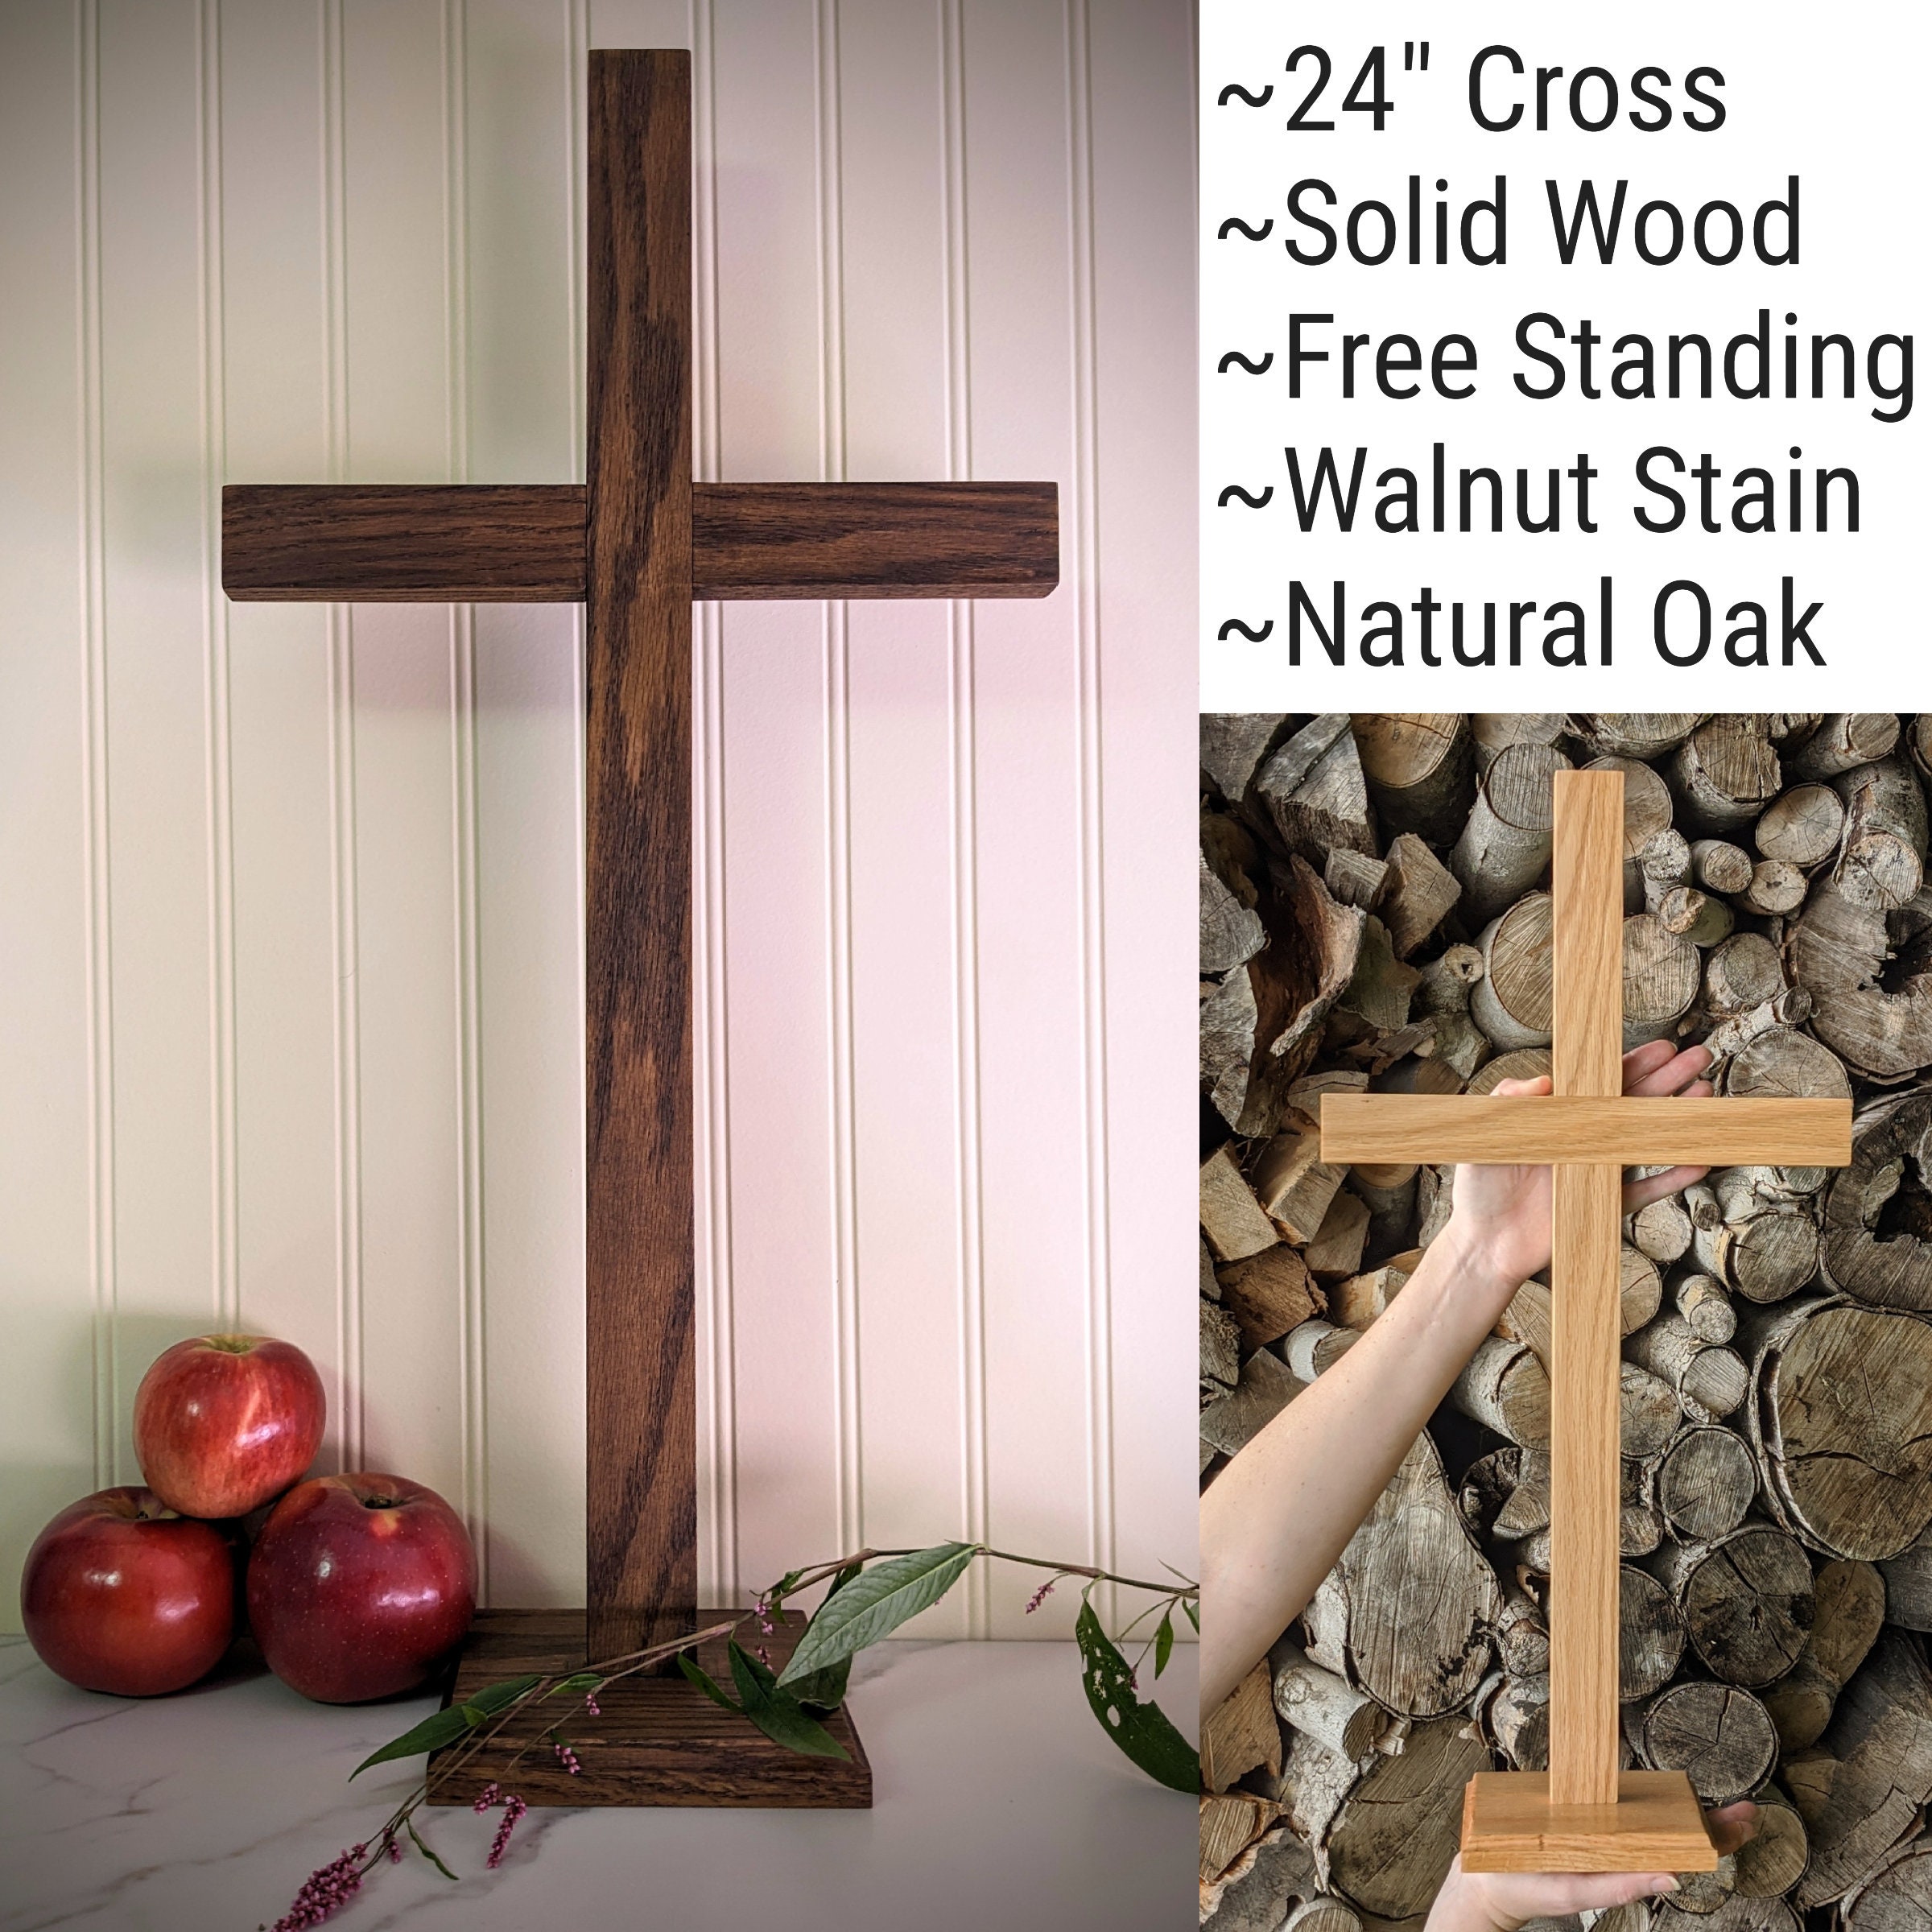 2x Easter Unfinished Wood Crosses for Crafts Table Displays Home Decor  7.9x15.5